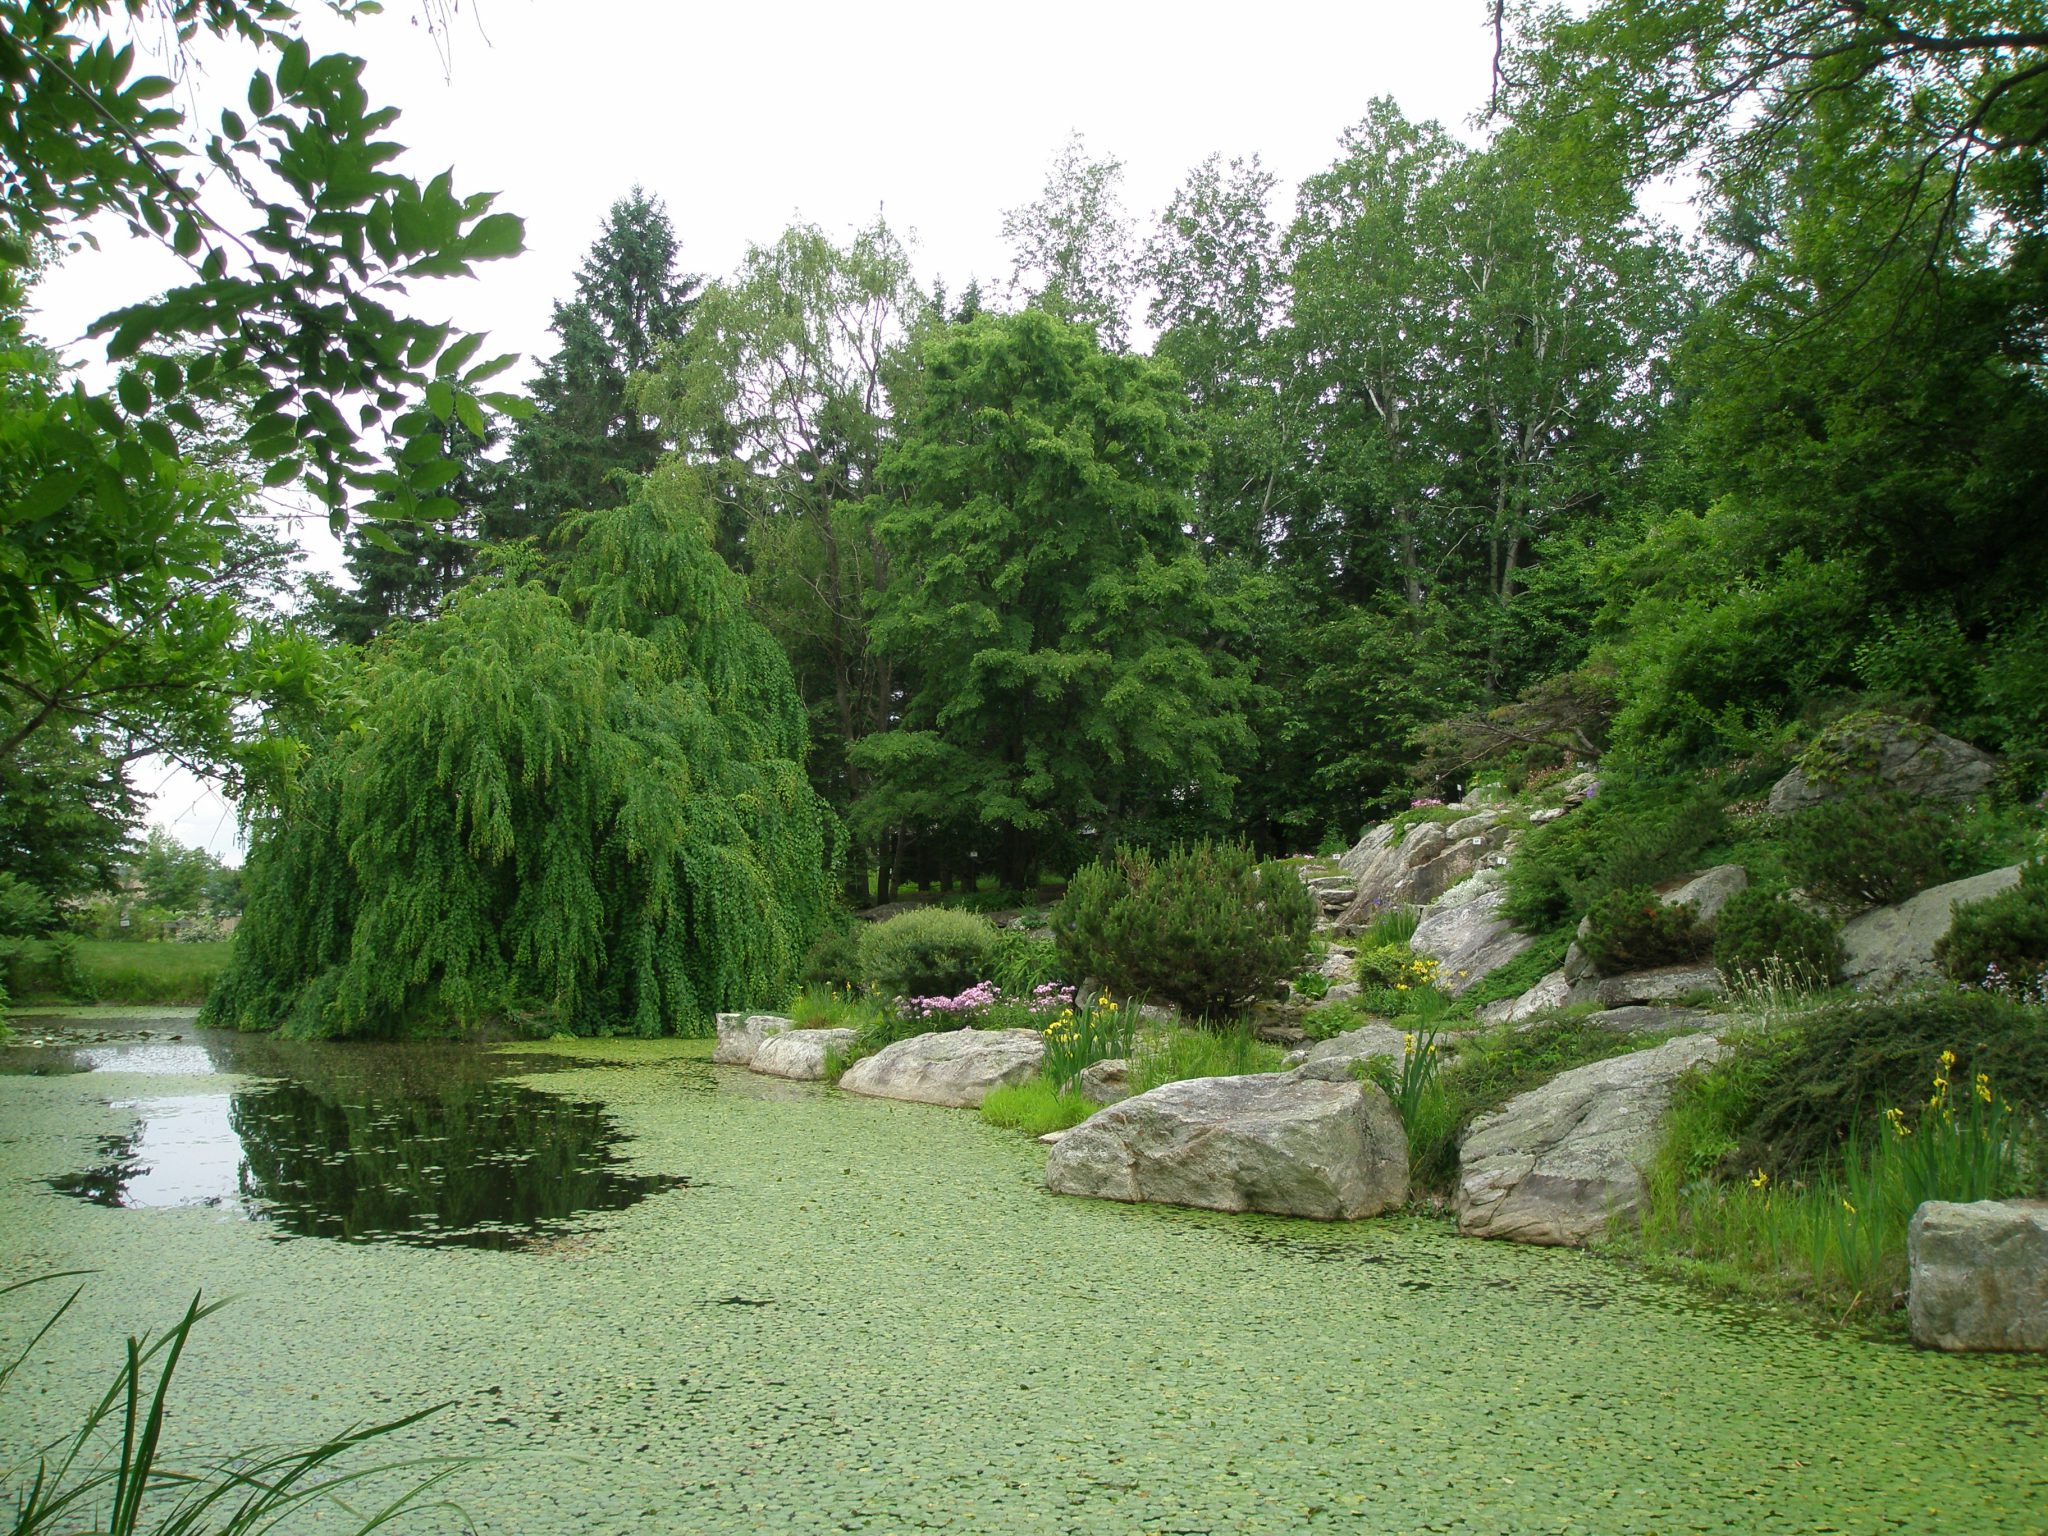 The Lake and Rock Ledge Garden